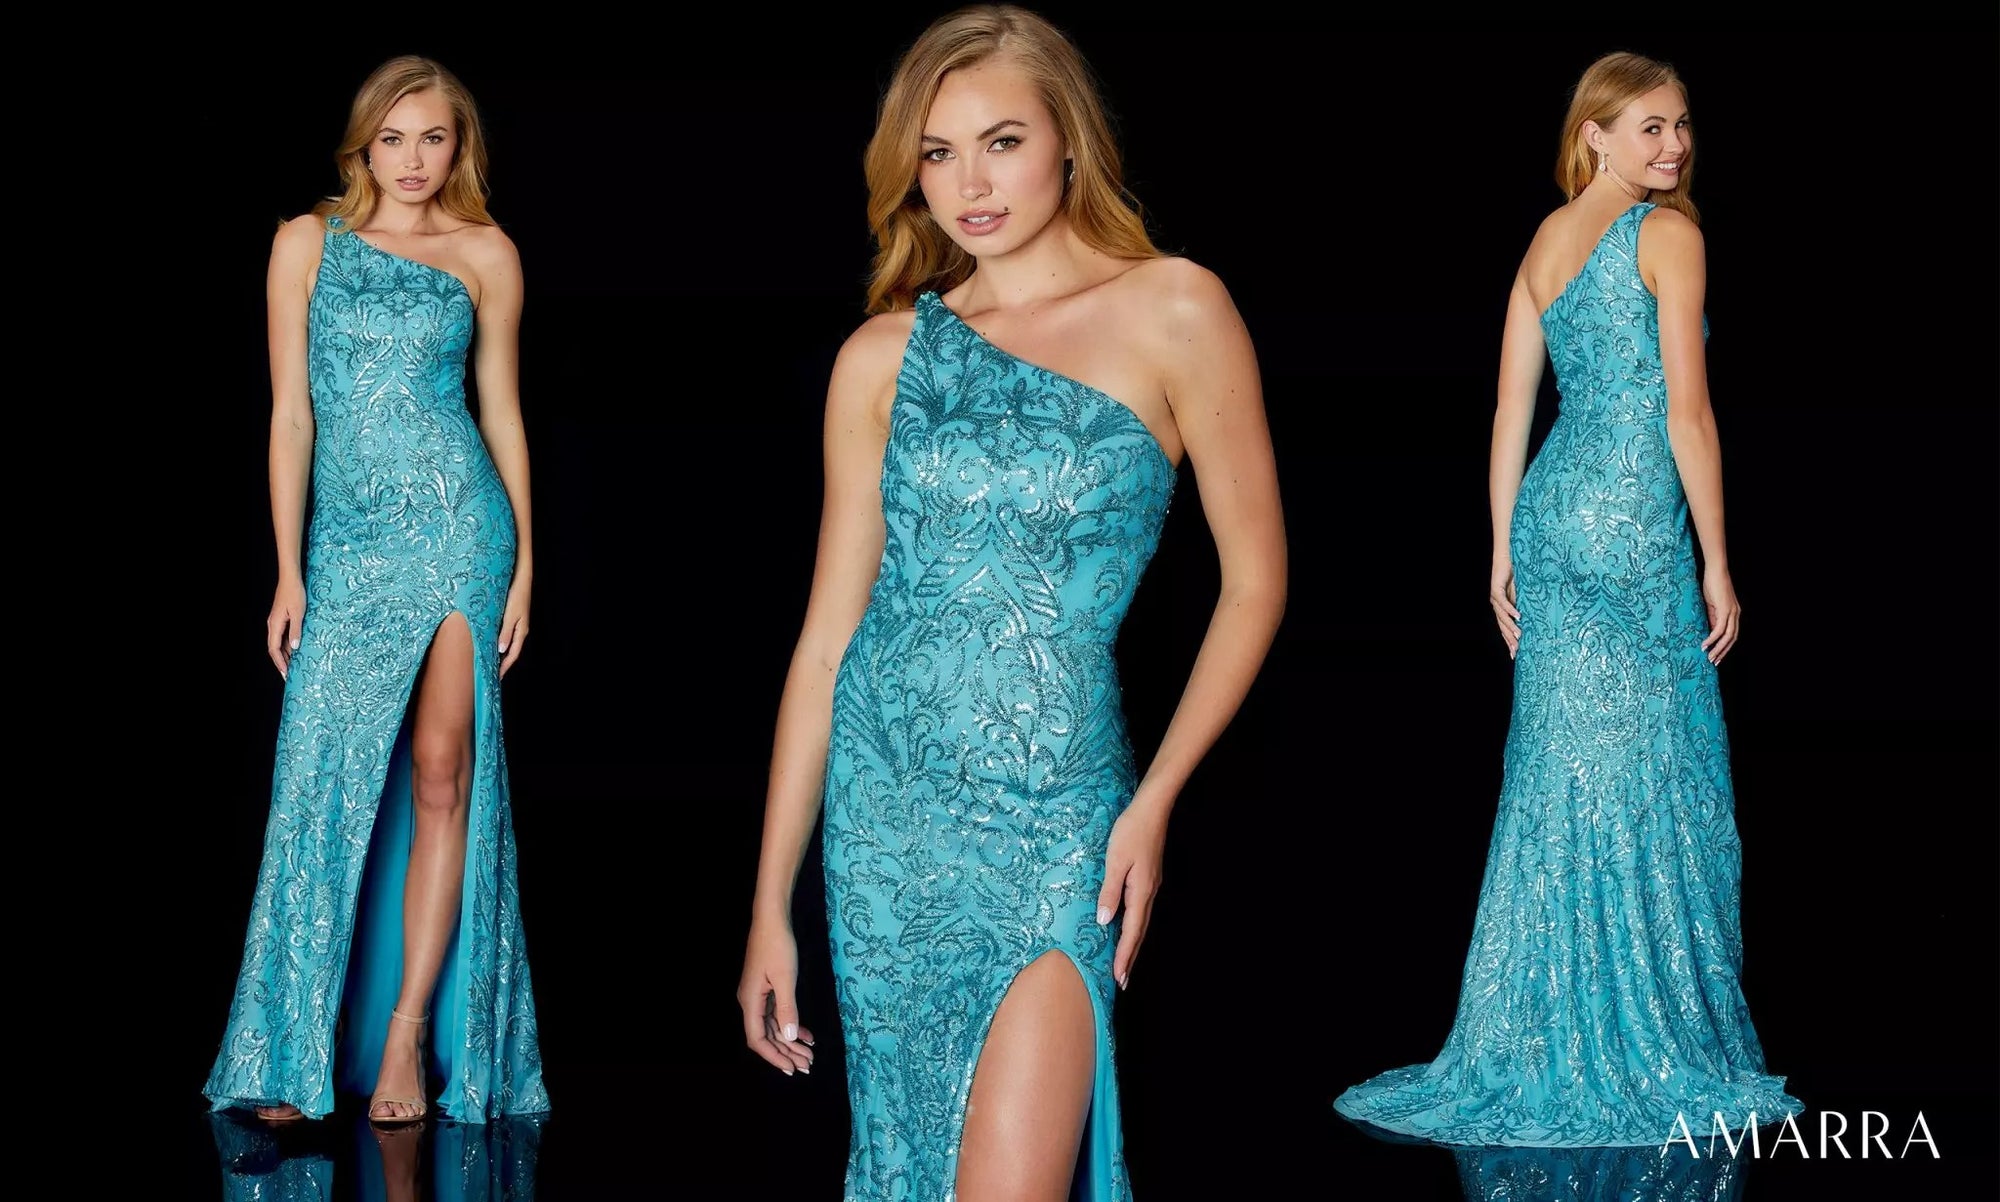 10 Common Mistakes Made When Prom Dress Shopping